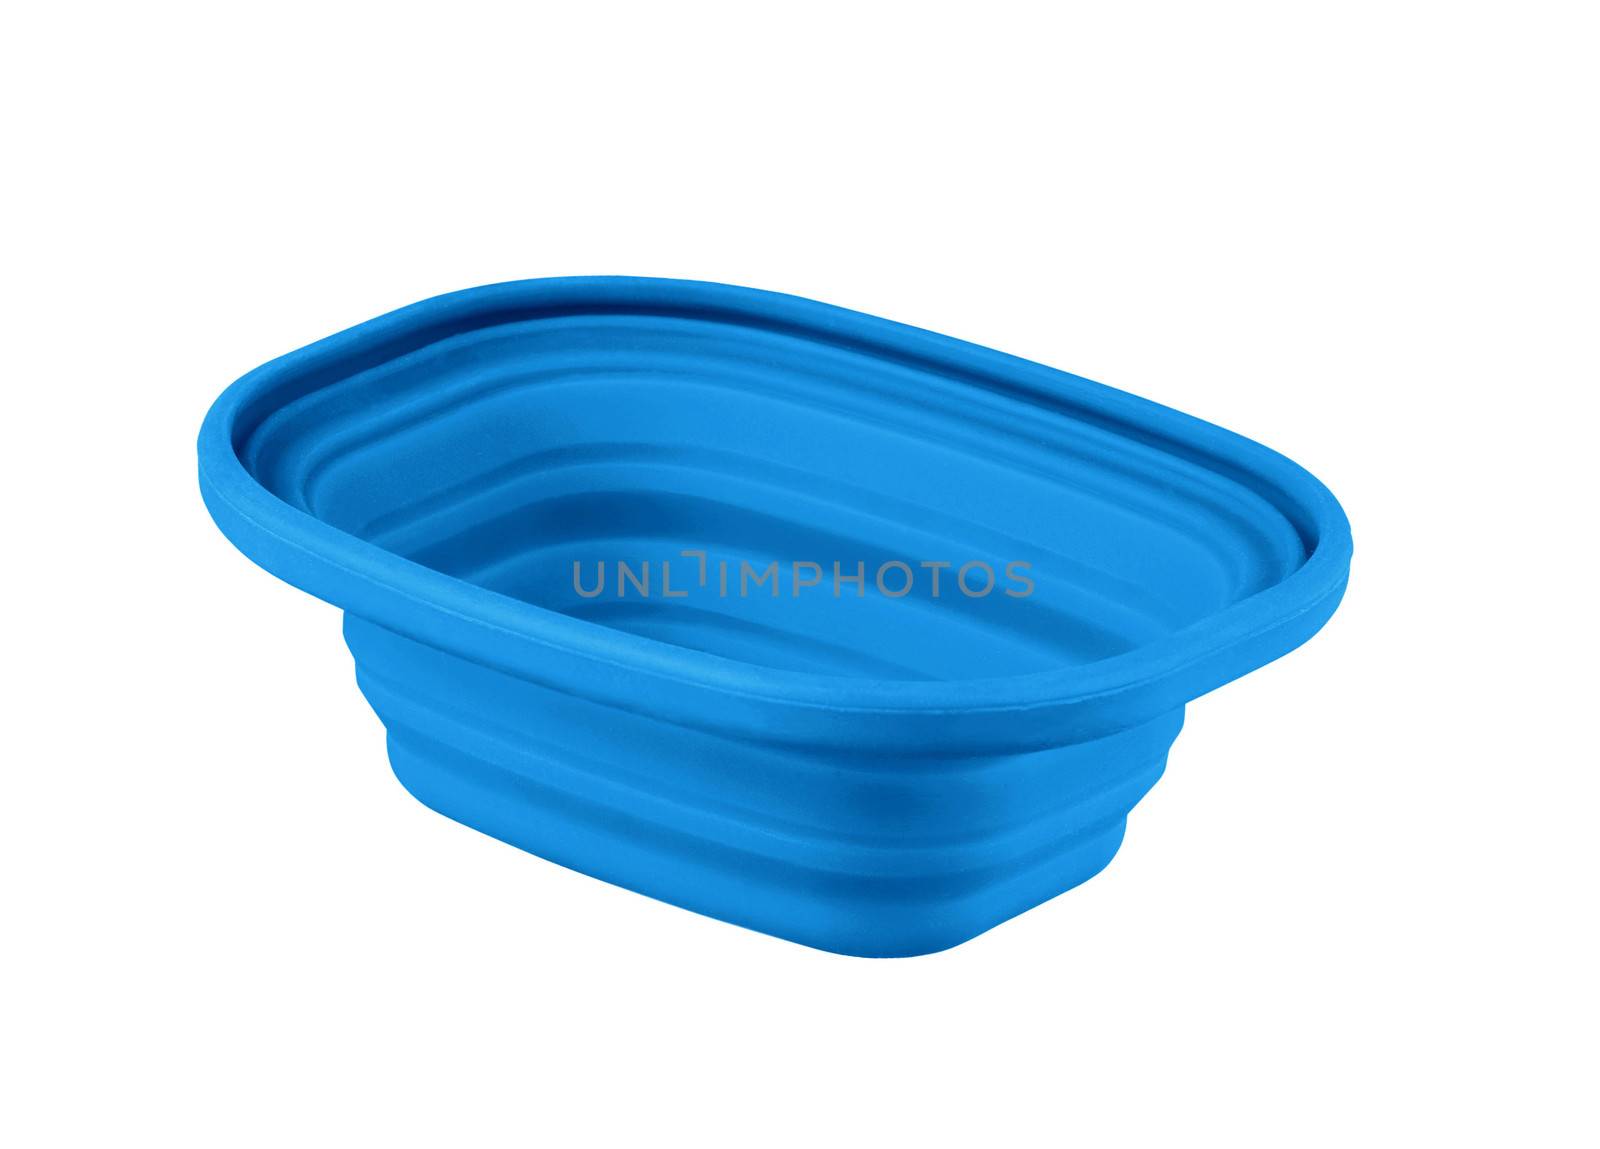 blue plastic food container by shutswis